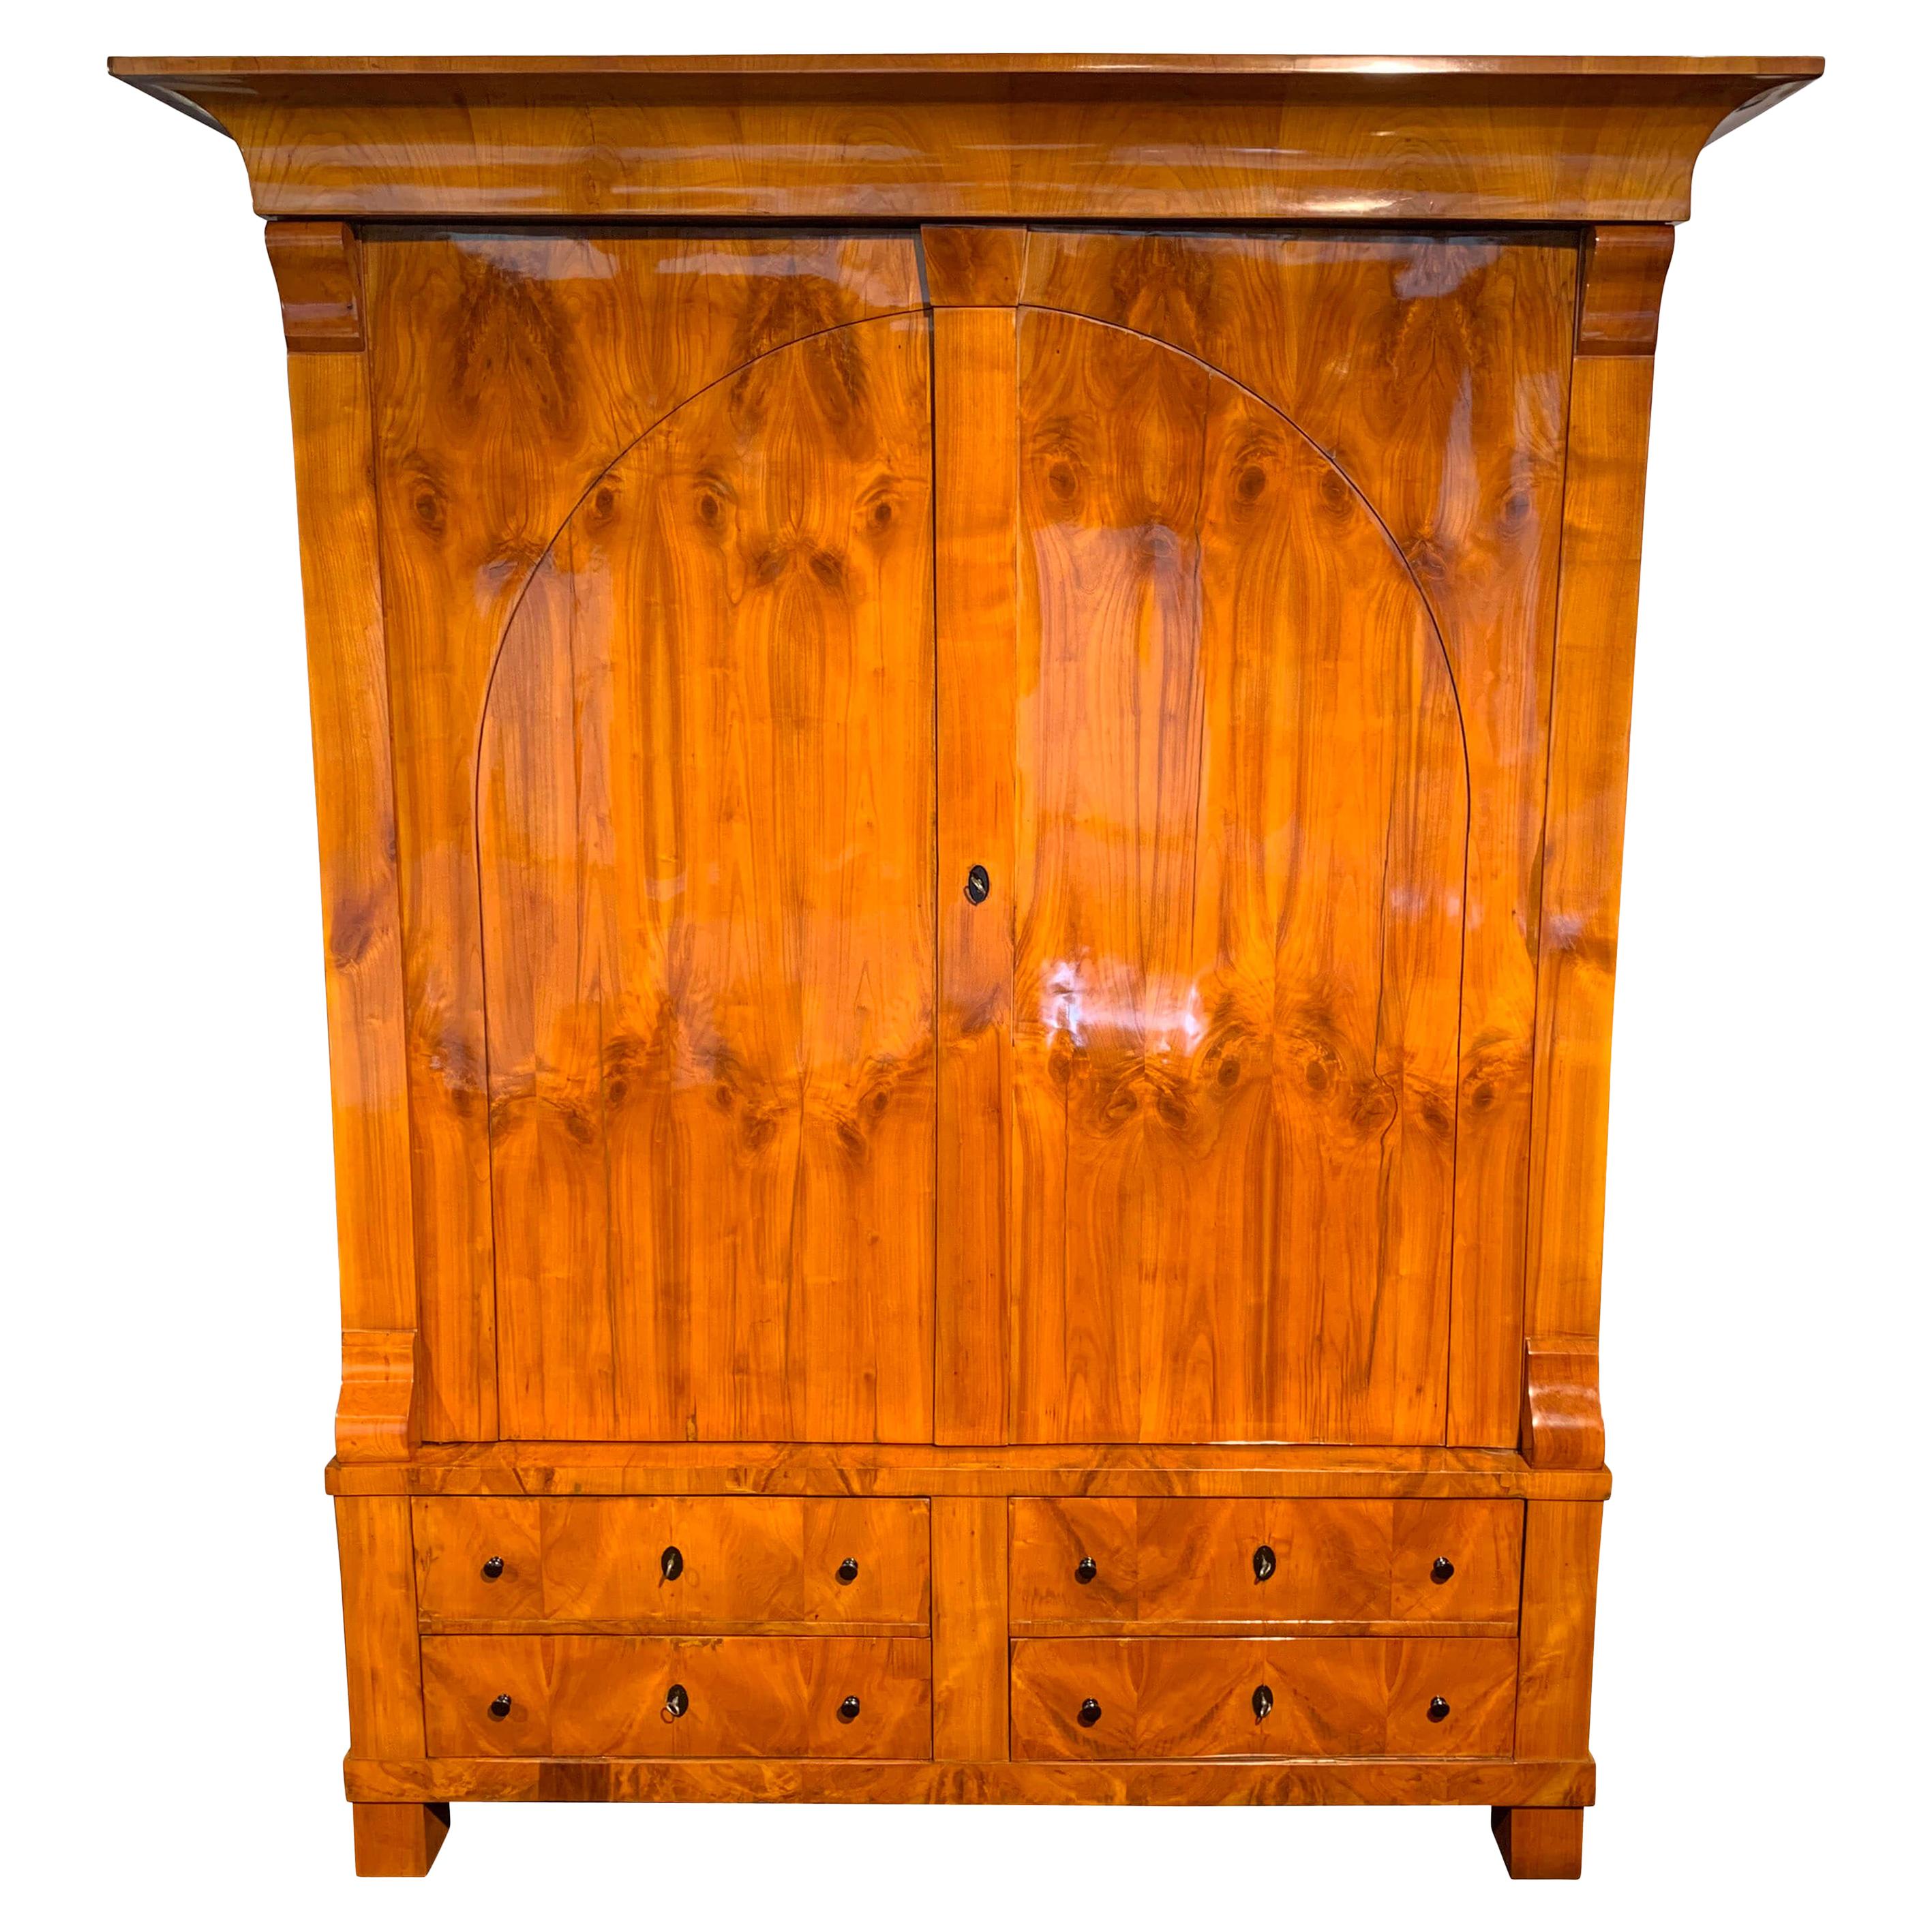 Large, original Biedermeier Armoire in cherry veneer, from Rhineland, Germany circa 1820.


Wonderful, bright cherry veneer, hand-polished with shellac (French Polish).
Beautiful big and curved cherry veneered cornice, classicist arch on the doors